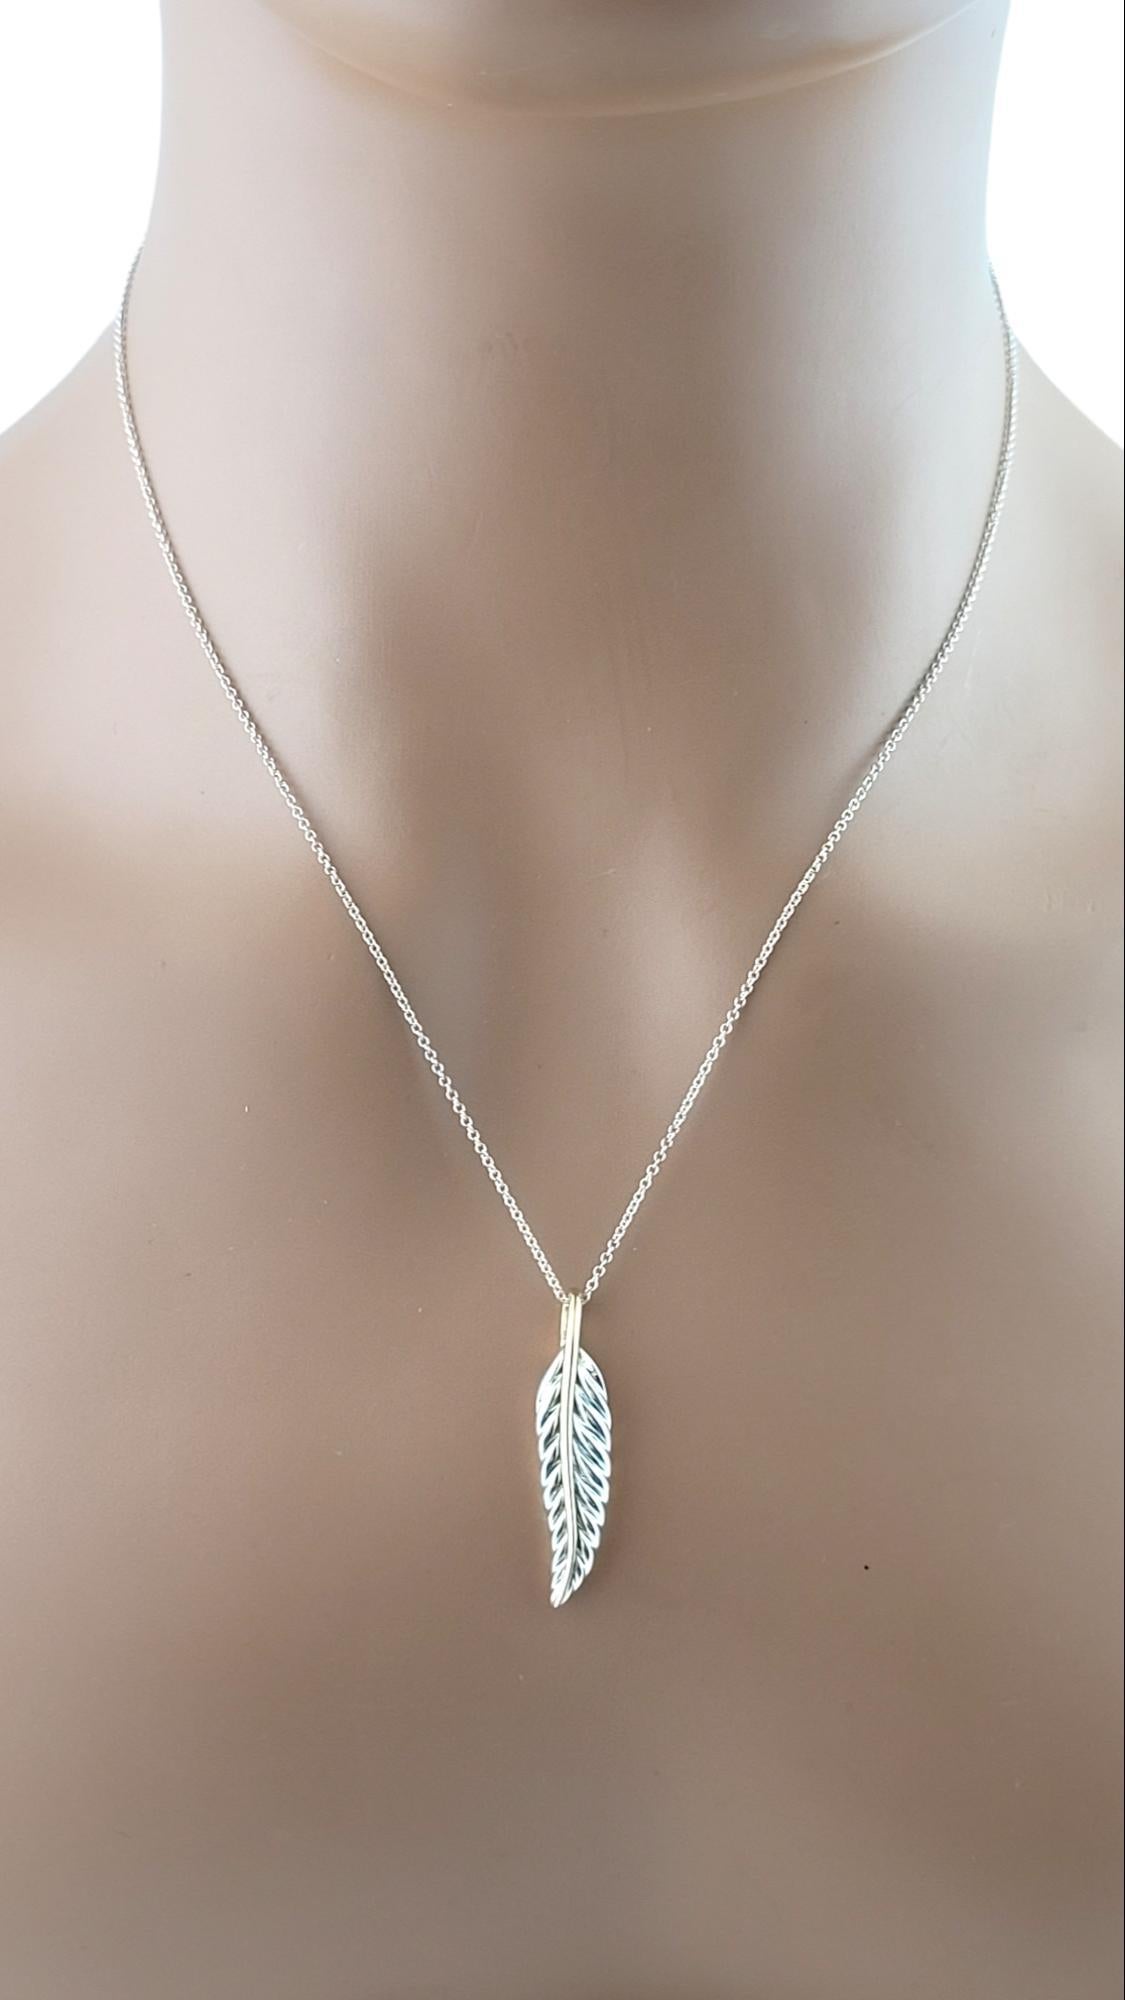 Tiffany & Co Sterling Silver 18K Yellow Gold Feather Necklace #15832 2